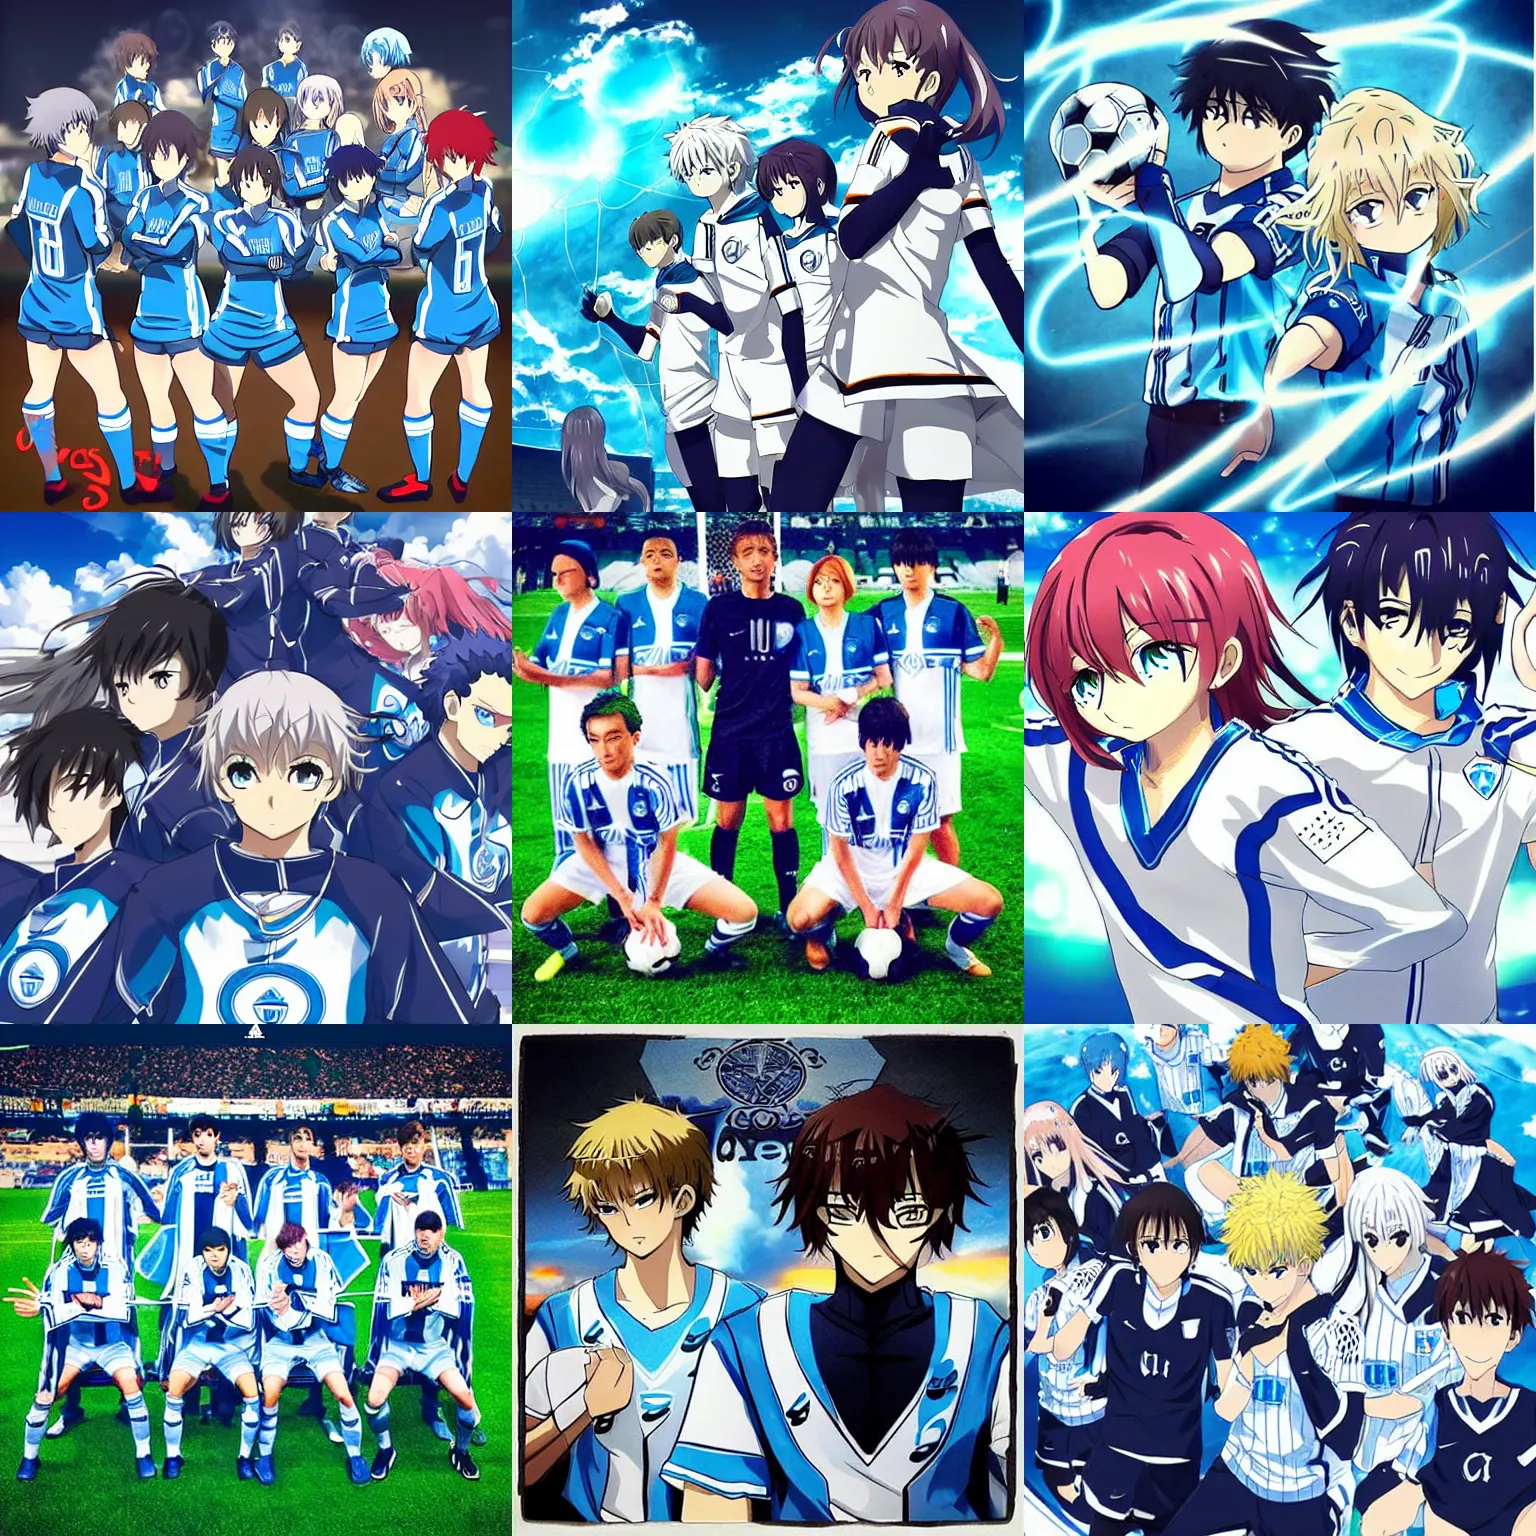 Prompt: “olympique de marseille soccer team, anime style like fate/stay night”